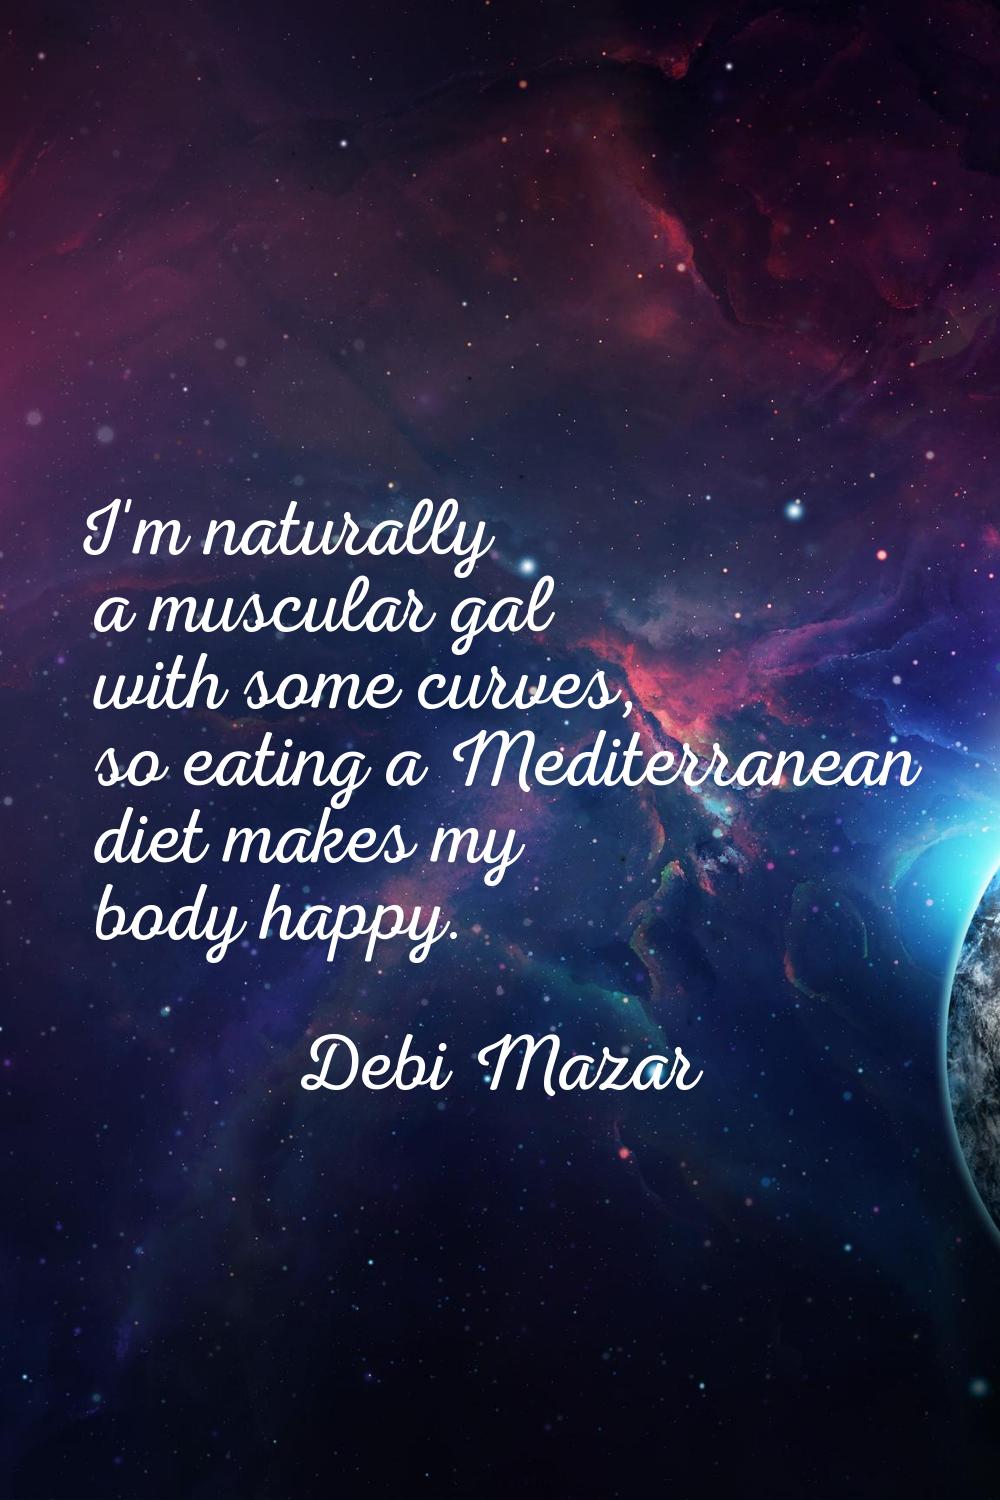 I'm naturally a muscular gal with some curves, so eating a Mediterranean diet makes my body happy.